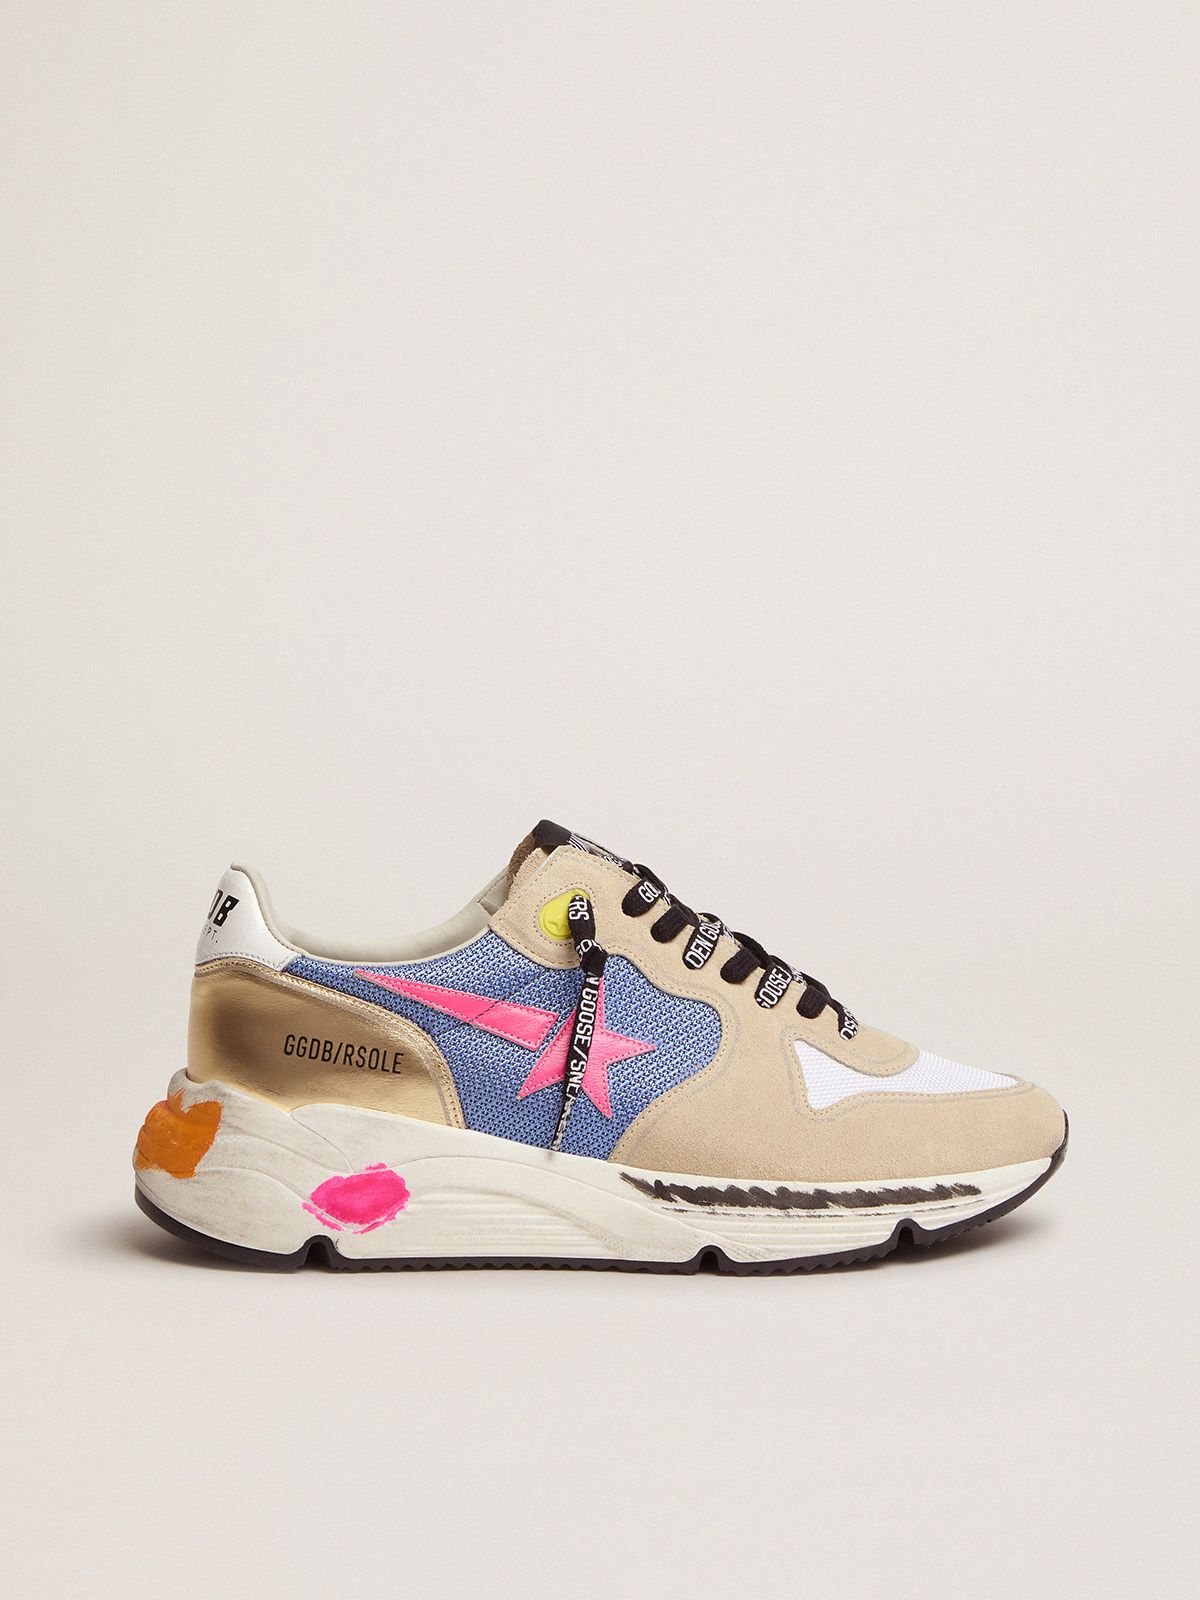 golden goose suede with detail gold in Running sneakers Sole